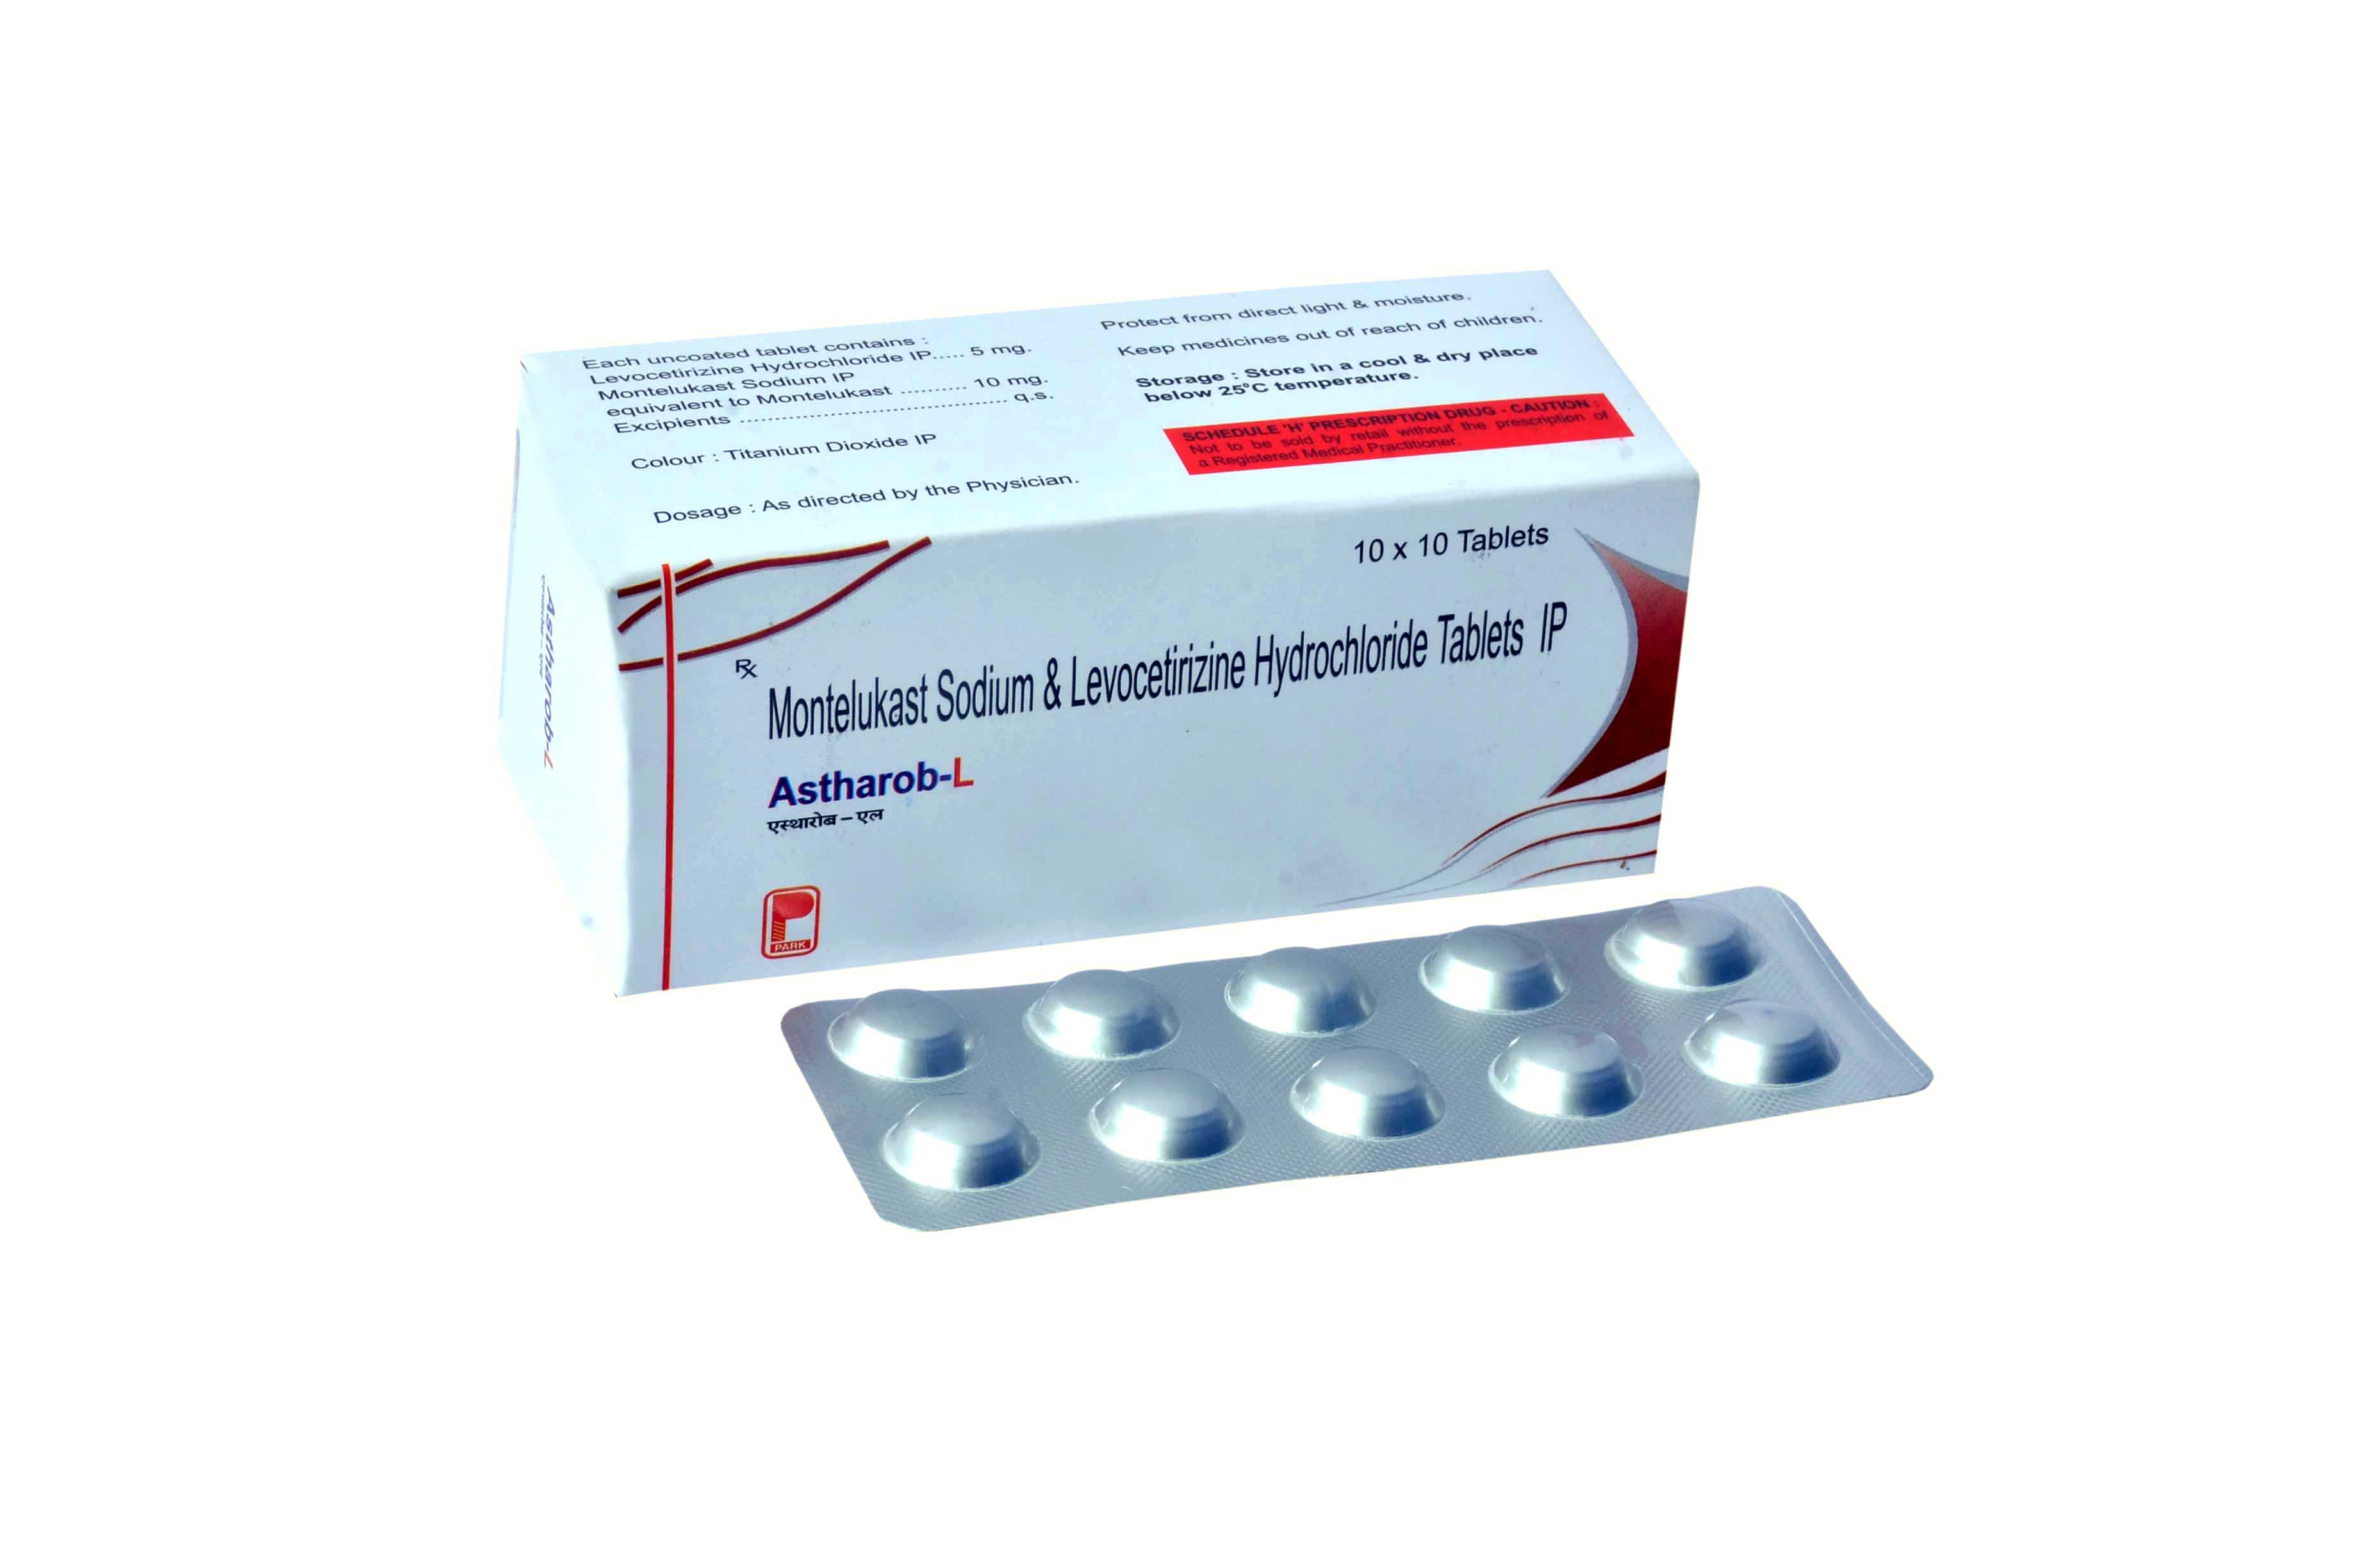 Product Name: Astharob L, Compositions of Astharob L are Montelukast Sodium & Levocetirizine Hydrochloride Tablets IP - Park Pharmaceuticals